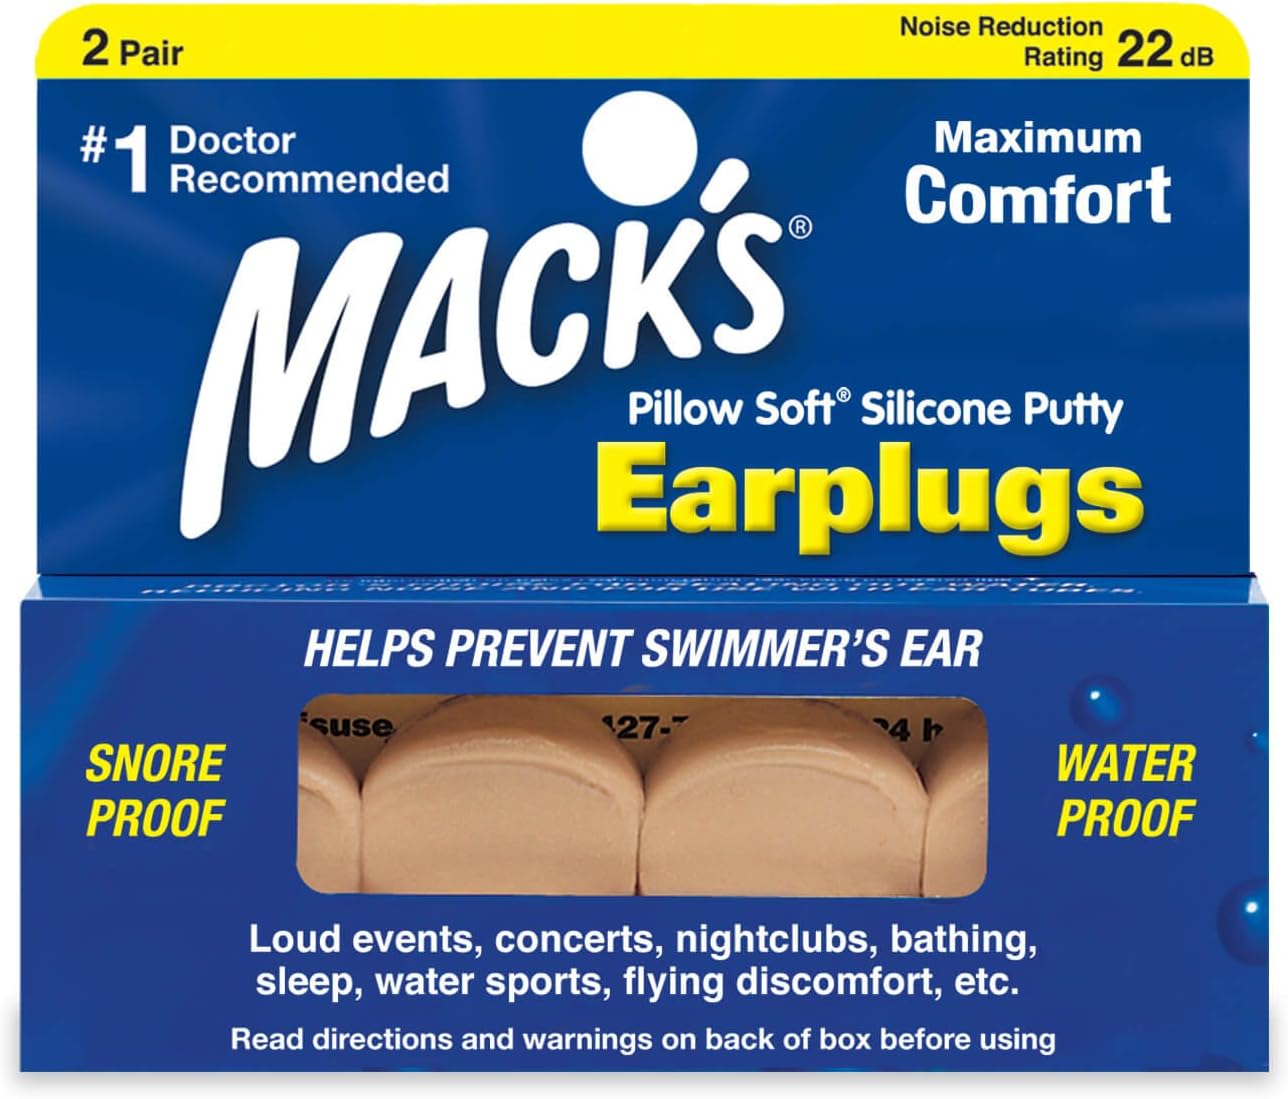 Mack's Pillow Soft Silicone Earplugs ? 2 Pair, Beige ? The Original Moldable Silicone Putty Ear Plugs for Sleeping, Snoring, Swimming, Travel, Concerts and Studying | Made in USA